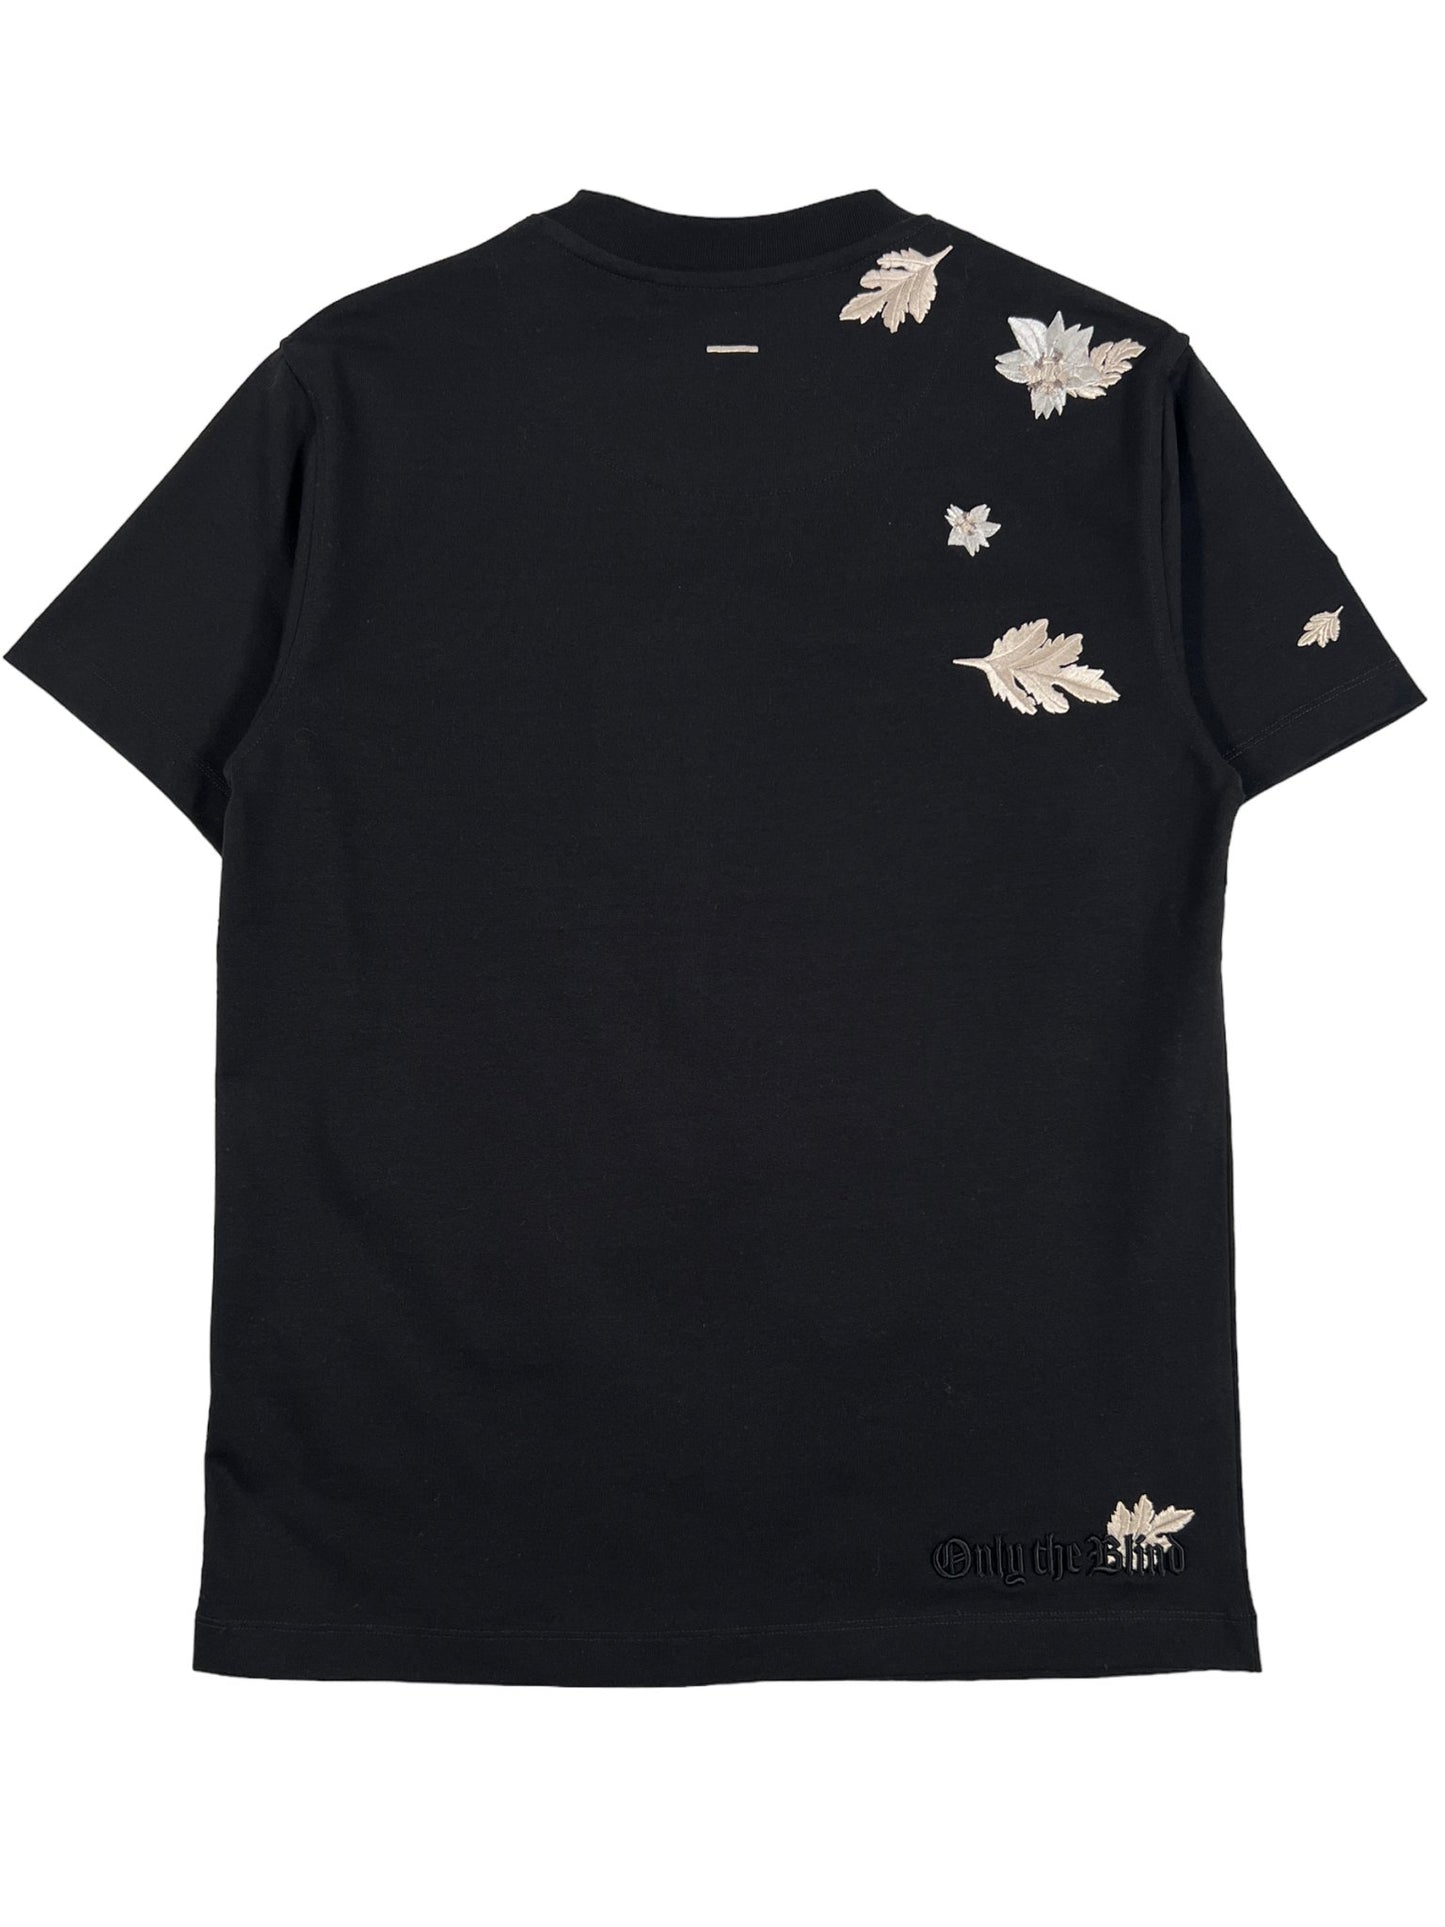 Probus ONLY THE BLIND OTB-T1337 WIND BLOSSOM T-SHIRT BLK ONLY THE BLIND OTB-T1337 WIND BLOSSOM T-SHIRT BLK BLACK